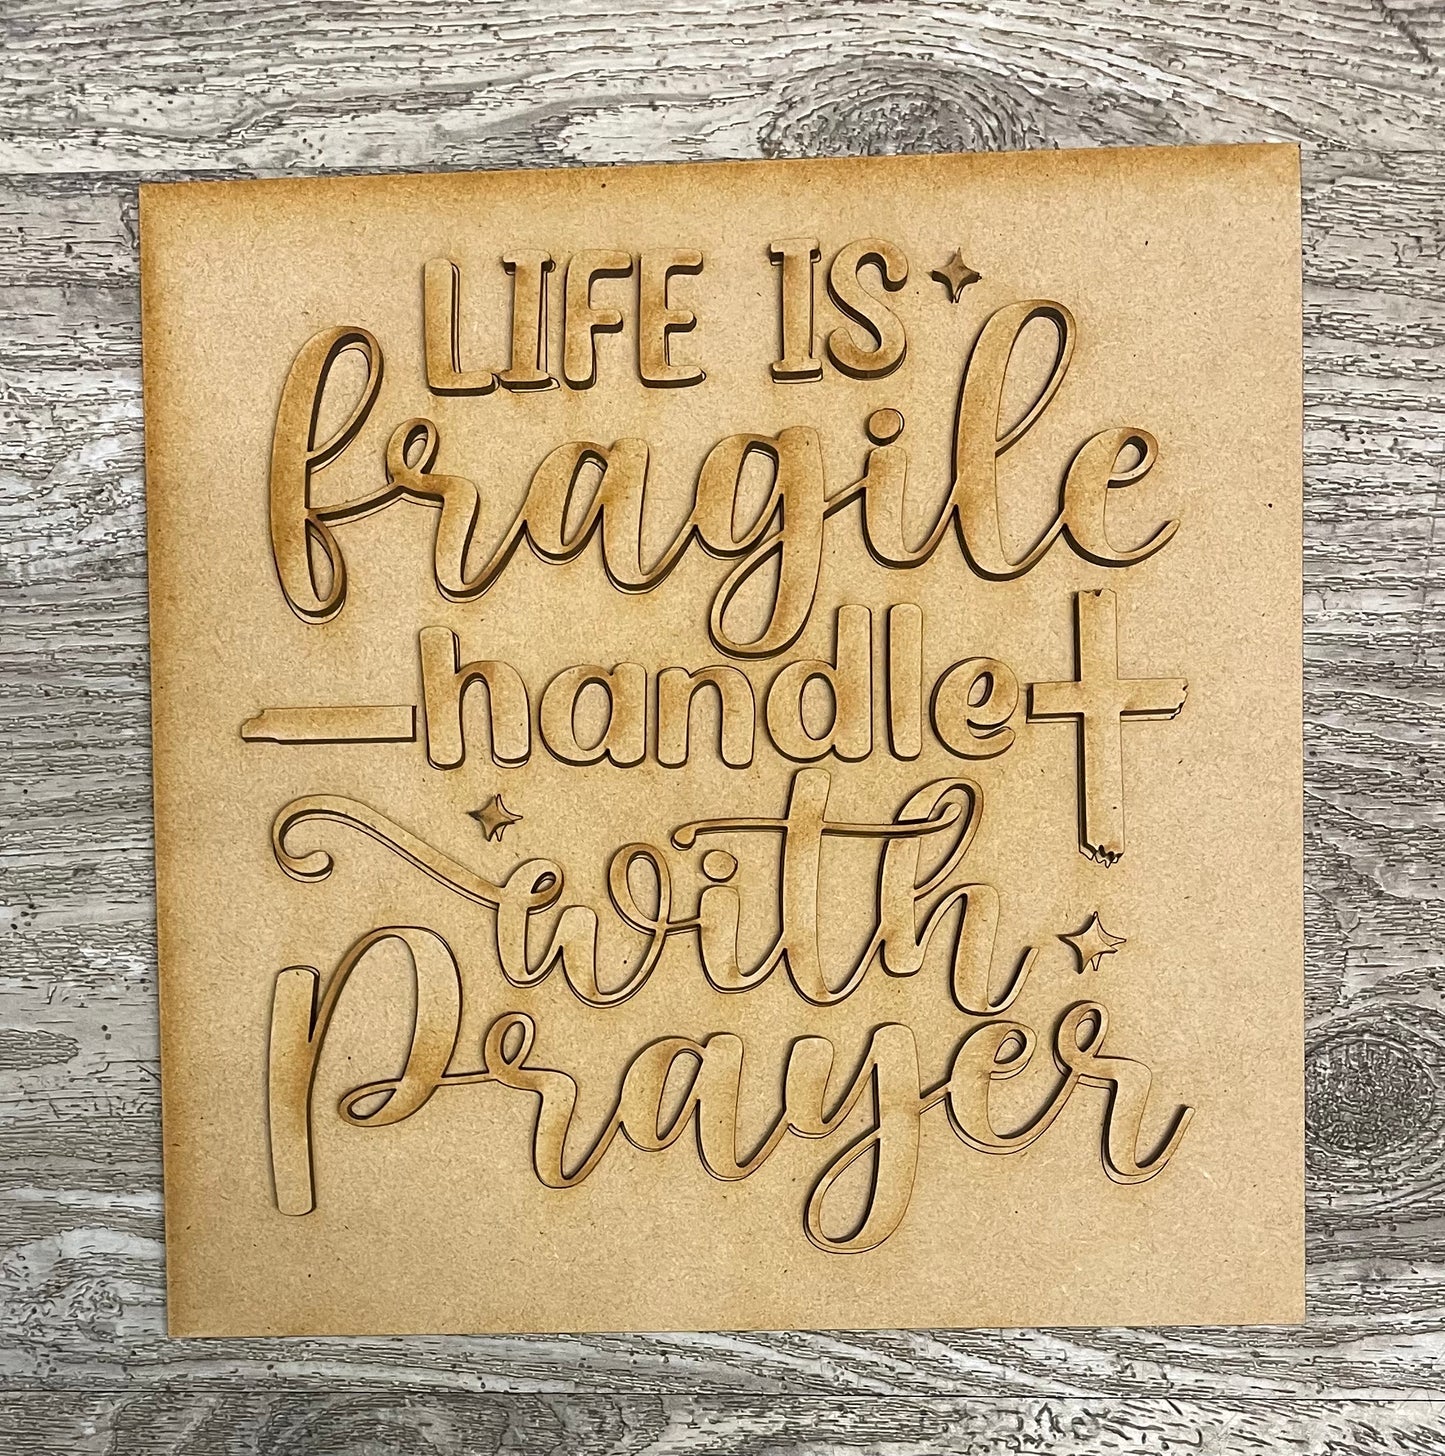 November Everyday  themed - Life is Fragile handle with prayer - unpainted kit